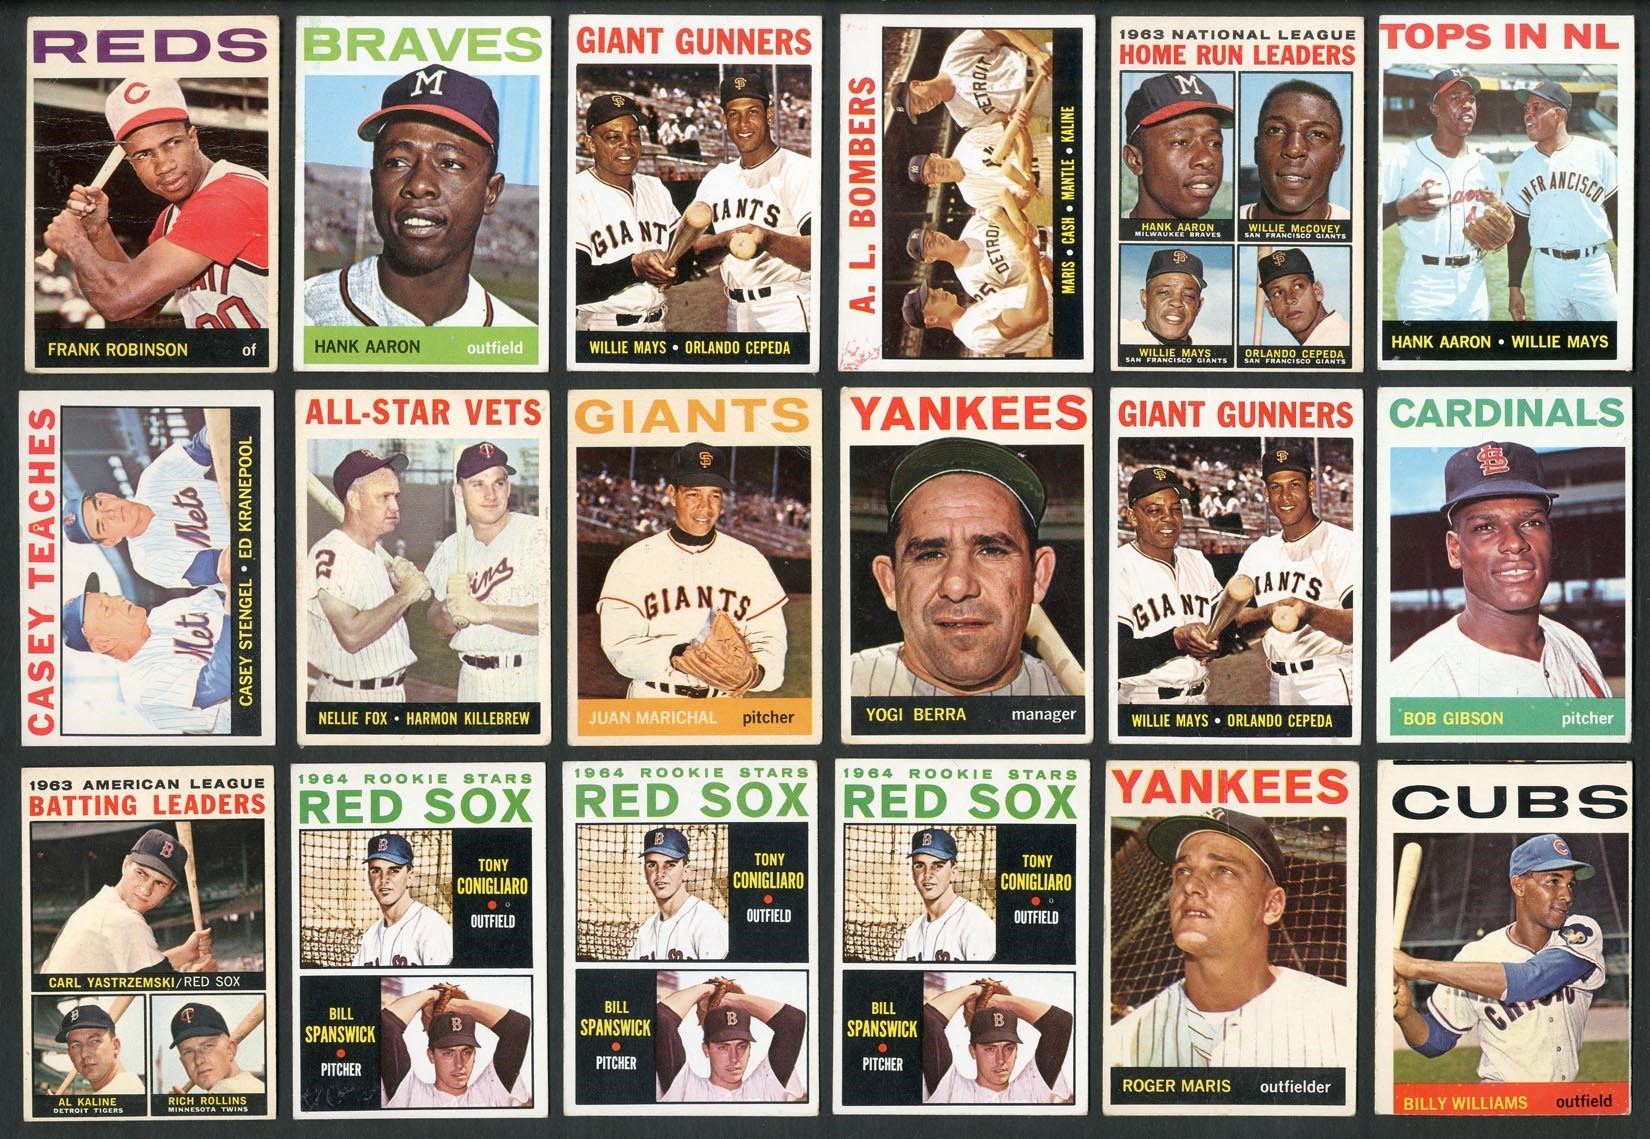 Baseball and Trading Cards - 1964 Topps Baseball Near-Complete Set w/Major Stars & Tons of Duplicates (1,150+ Cards)